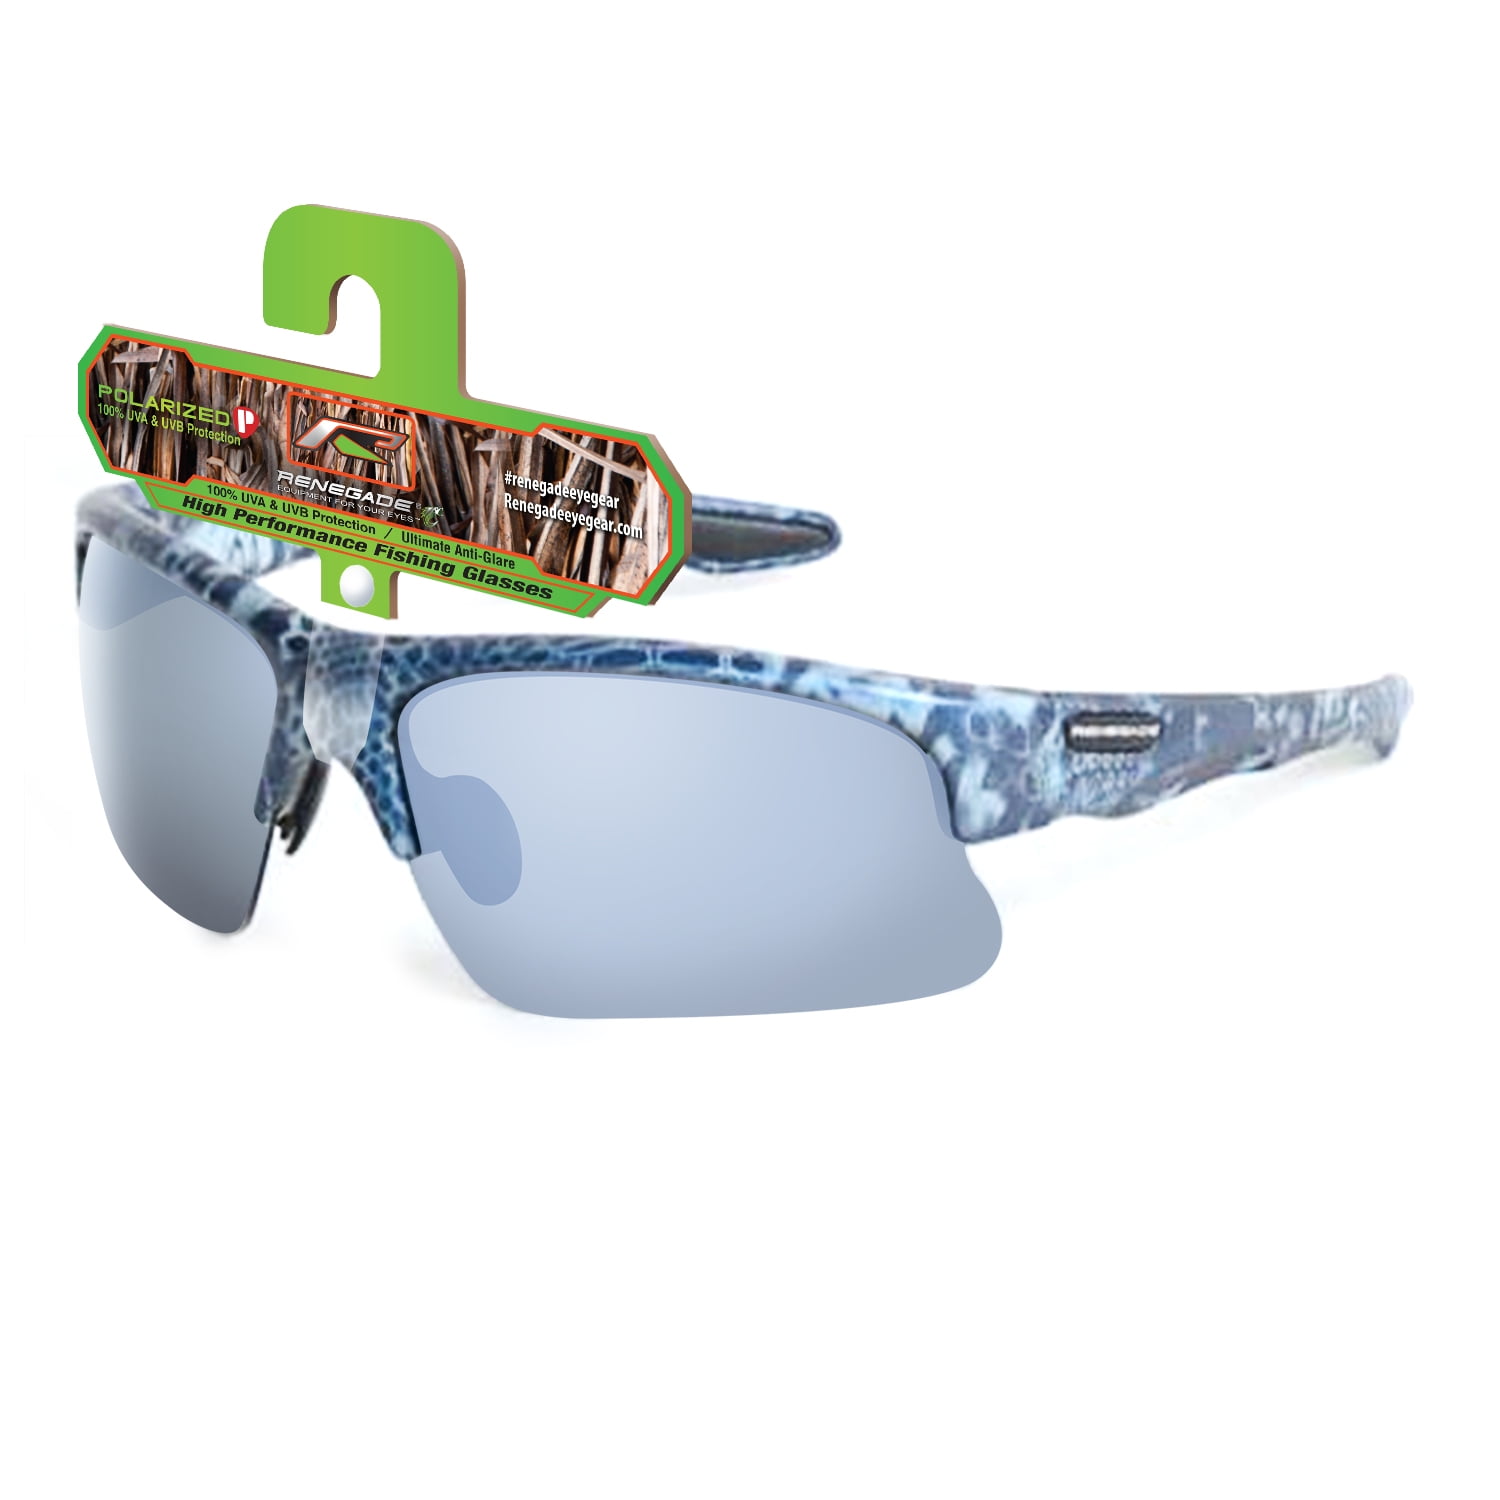 Renegade Ike Polarized Fishing Sunglasses male and Female- Fin 1 Pair, Adult, adult Unisex, Blue